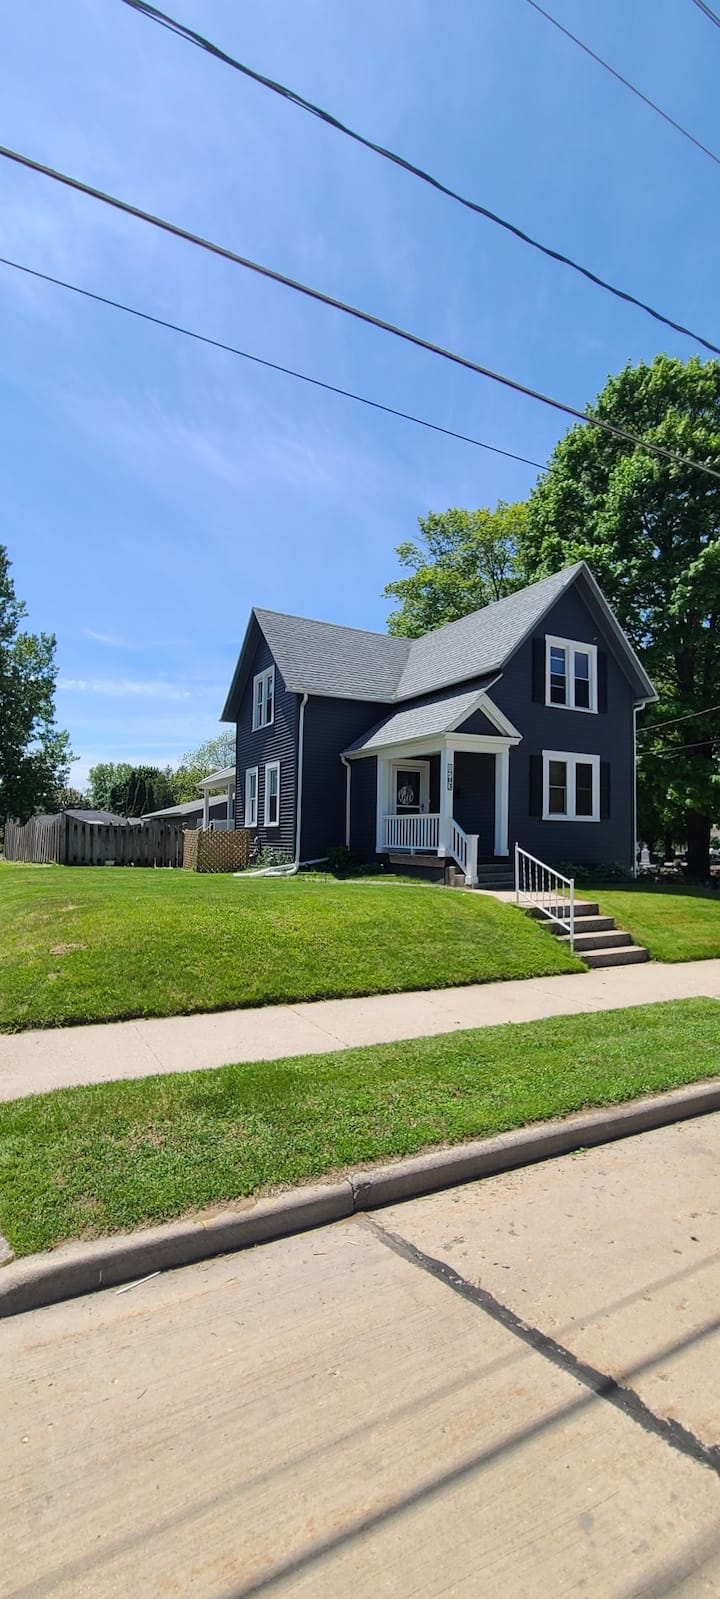 4 Bedroom- Featuring Outside Entertainment Space - Manitowoc, WI